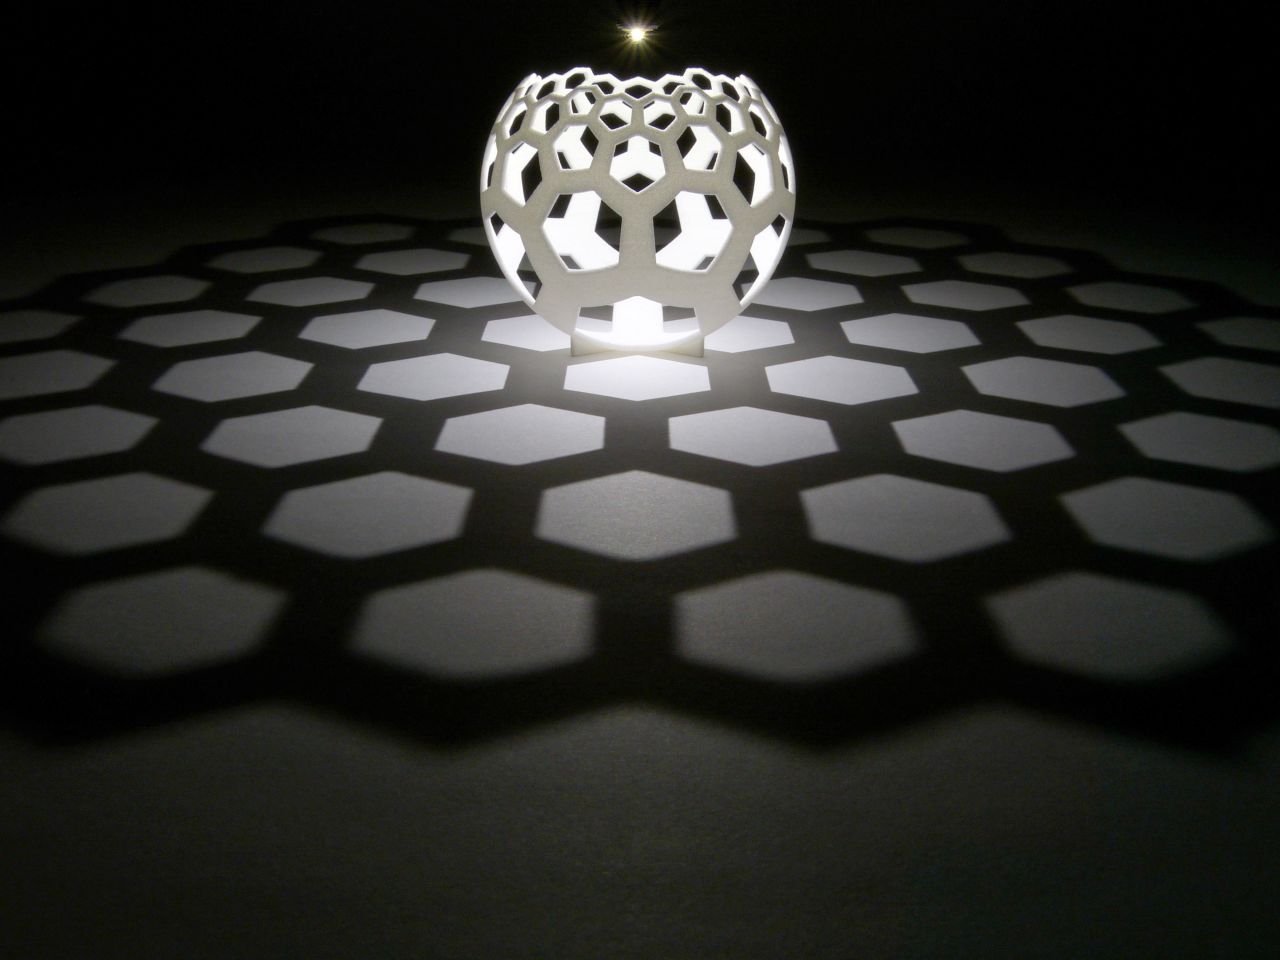 Light shone from a pinpoint source creates a "map" on the table in the shadow of the globe. A grid of straight lines appear from the curved 3D-printed sculpture. 